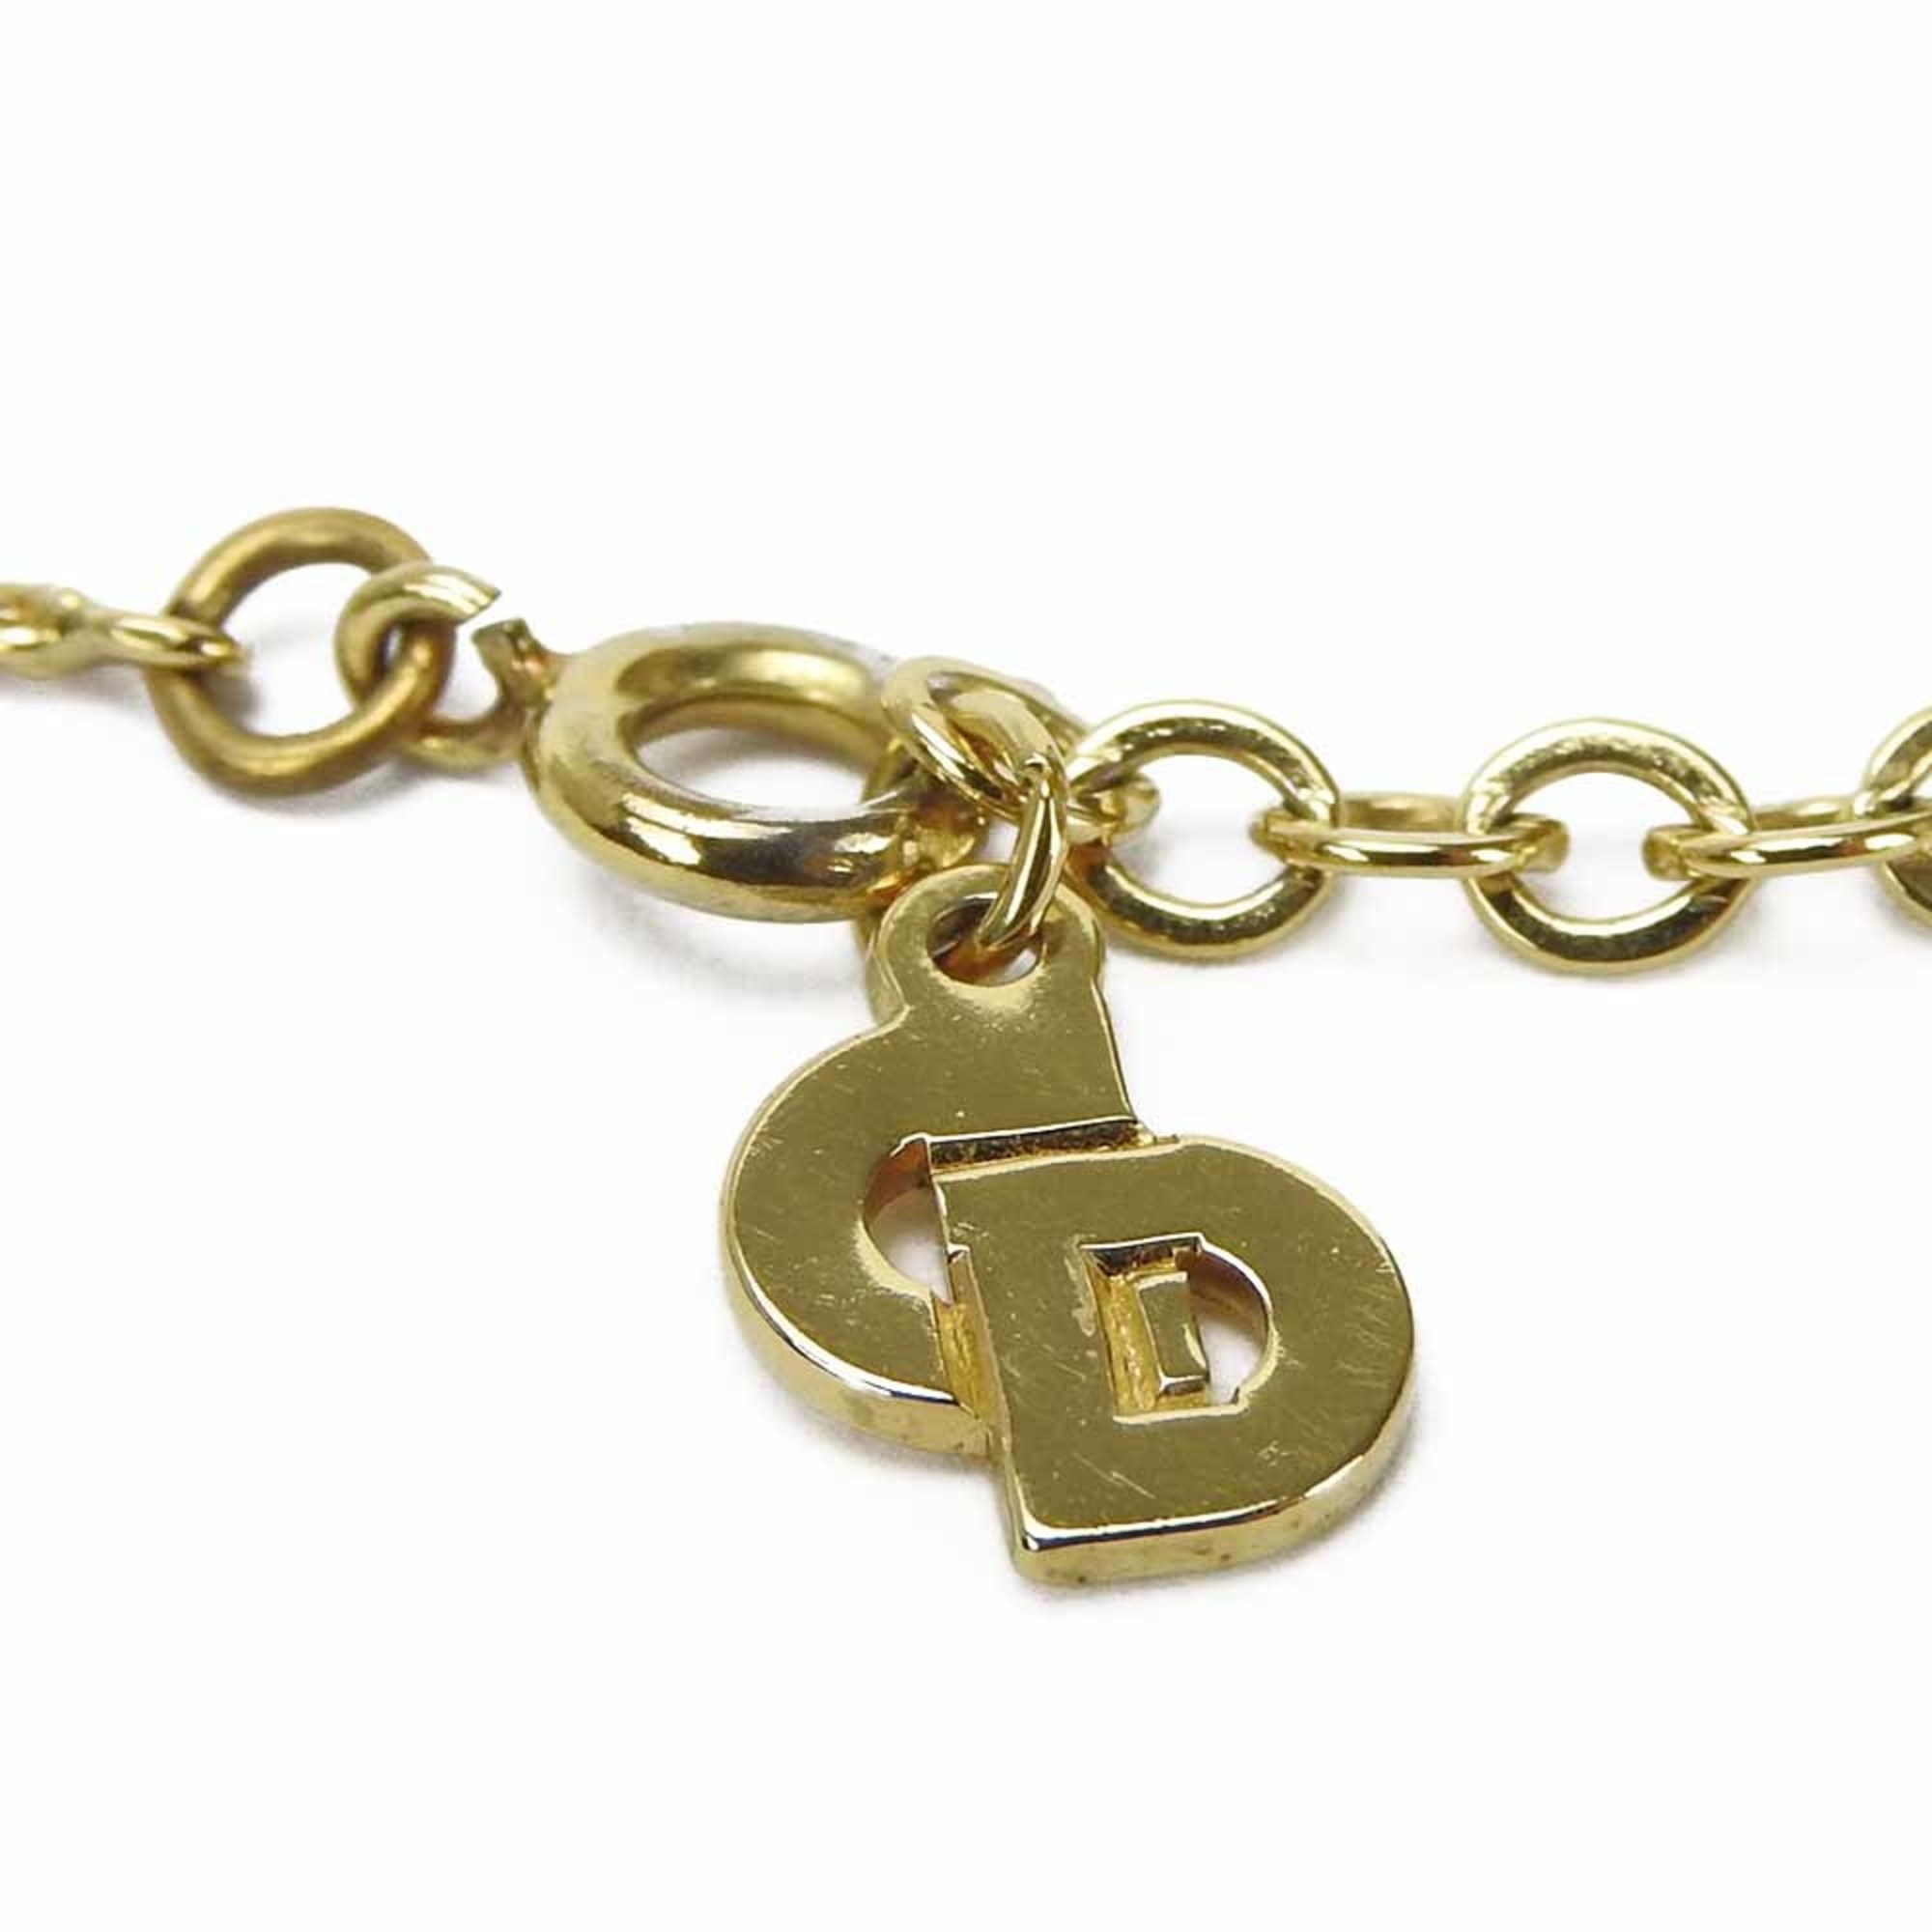 Christian Dior Necklace Gold Pendant GP Plated Accessories Women's Neckless